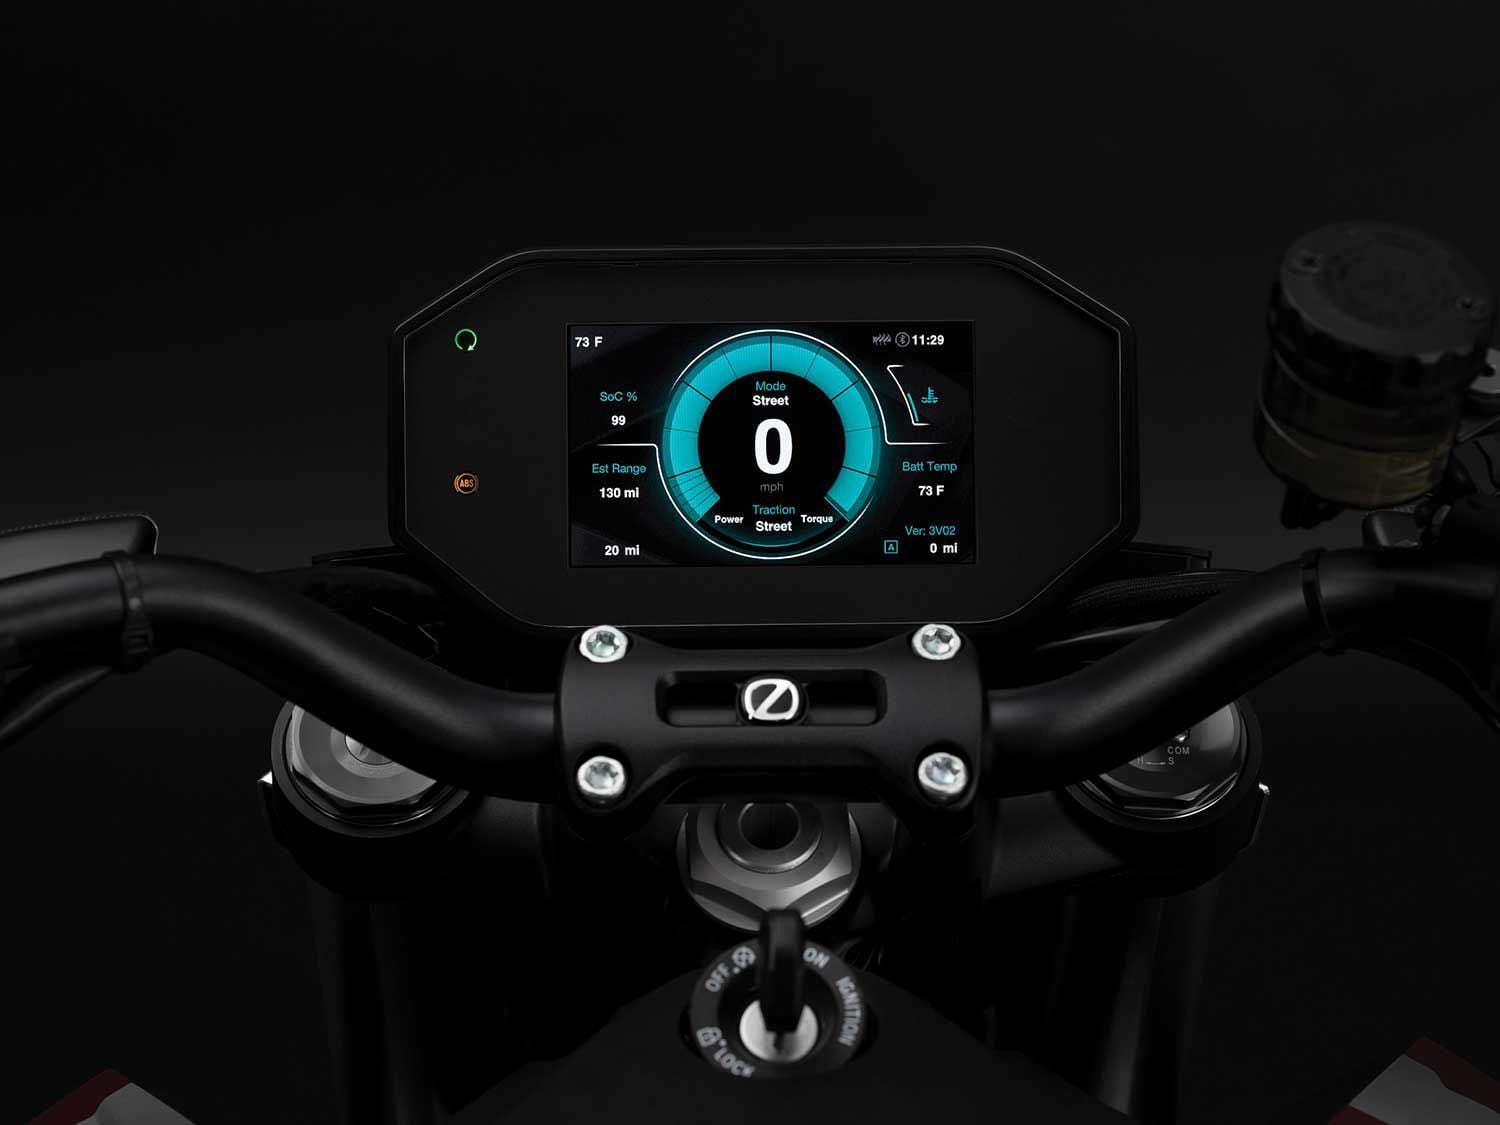 The SR/F is the first “commercially available connected motorcycle on the market.” Which means you can access all kinds of info on your bike, customize ride modes, share data, and more.